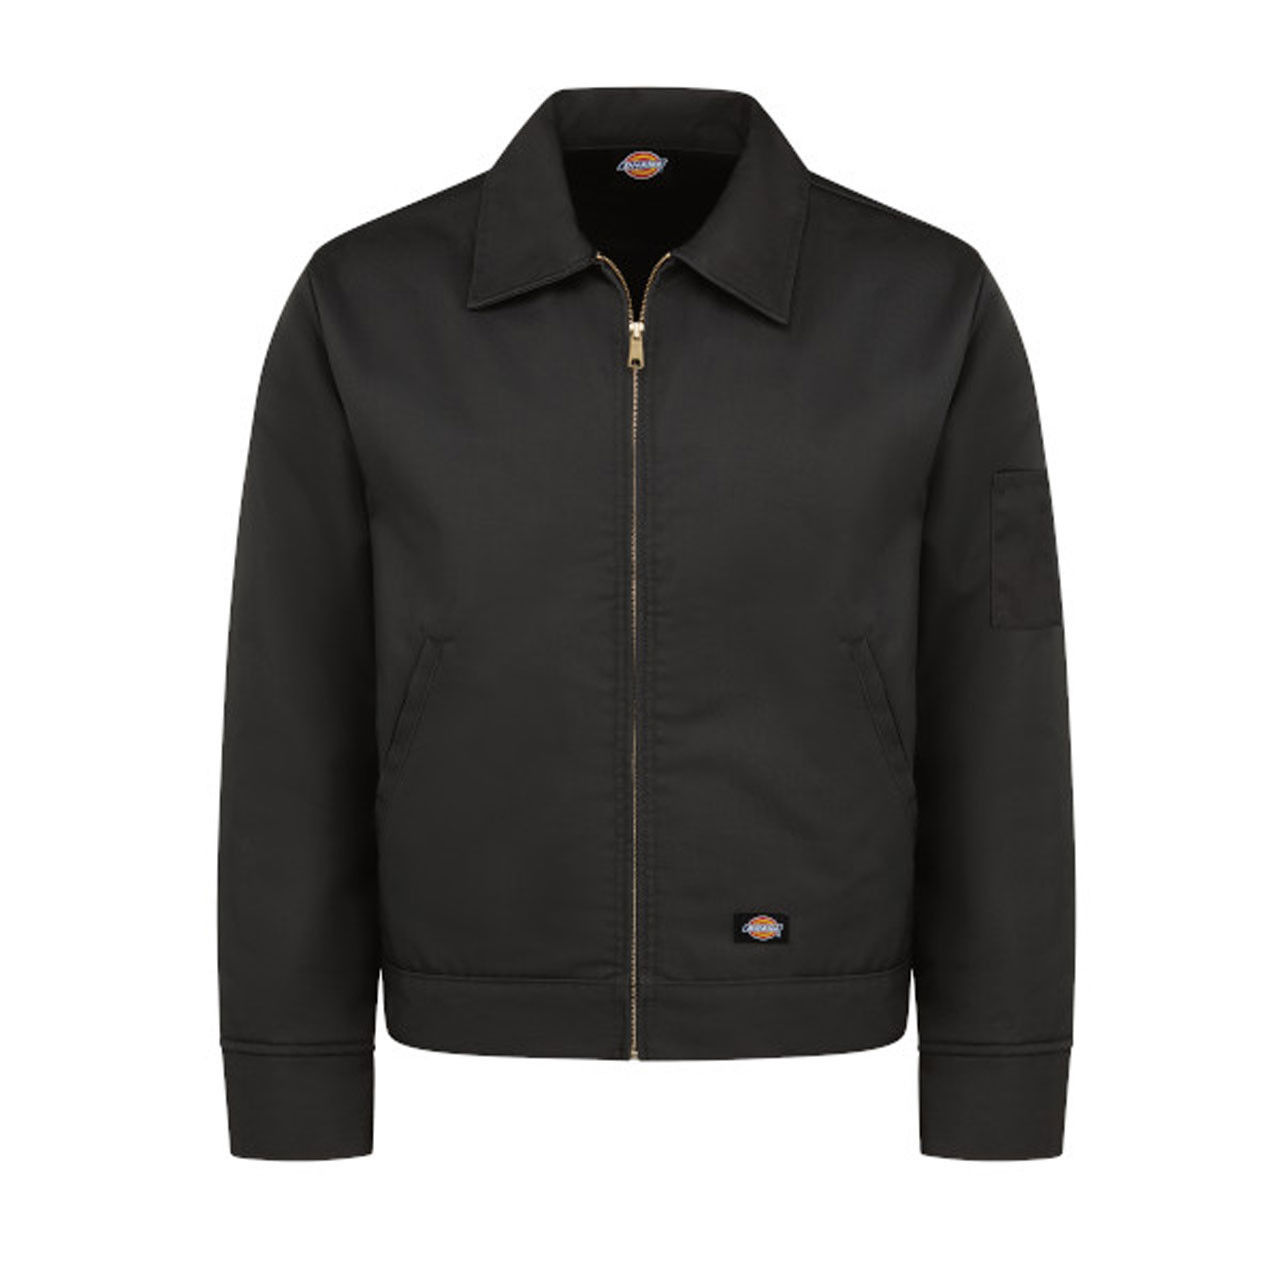 What colors are offered for the black Dickies jacket?